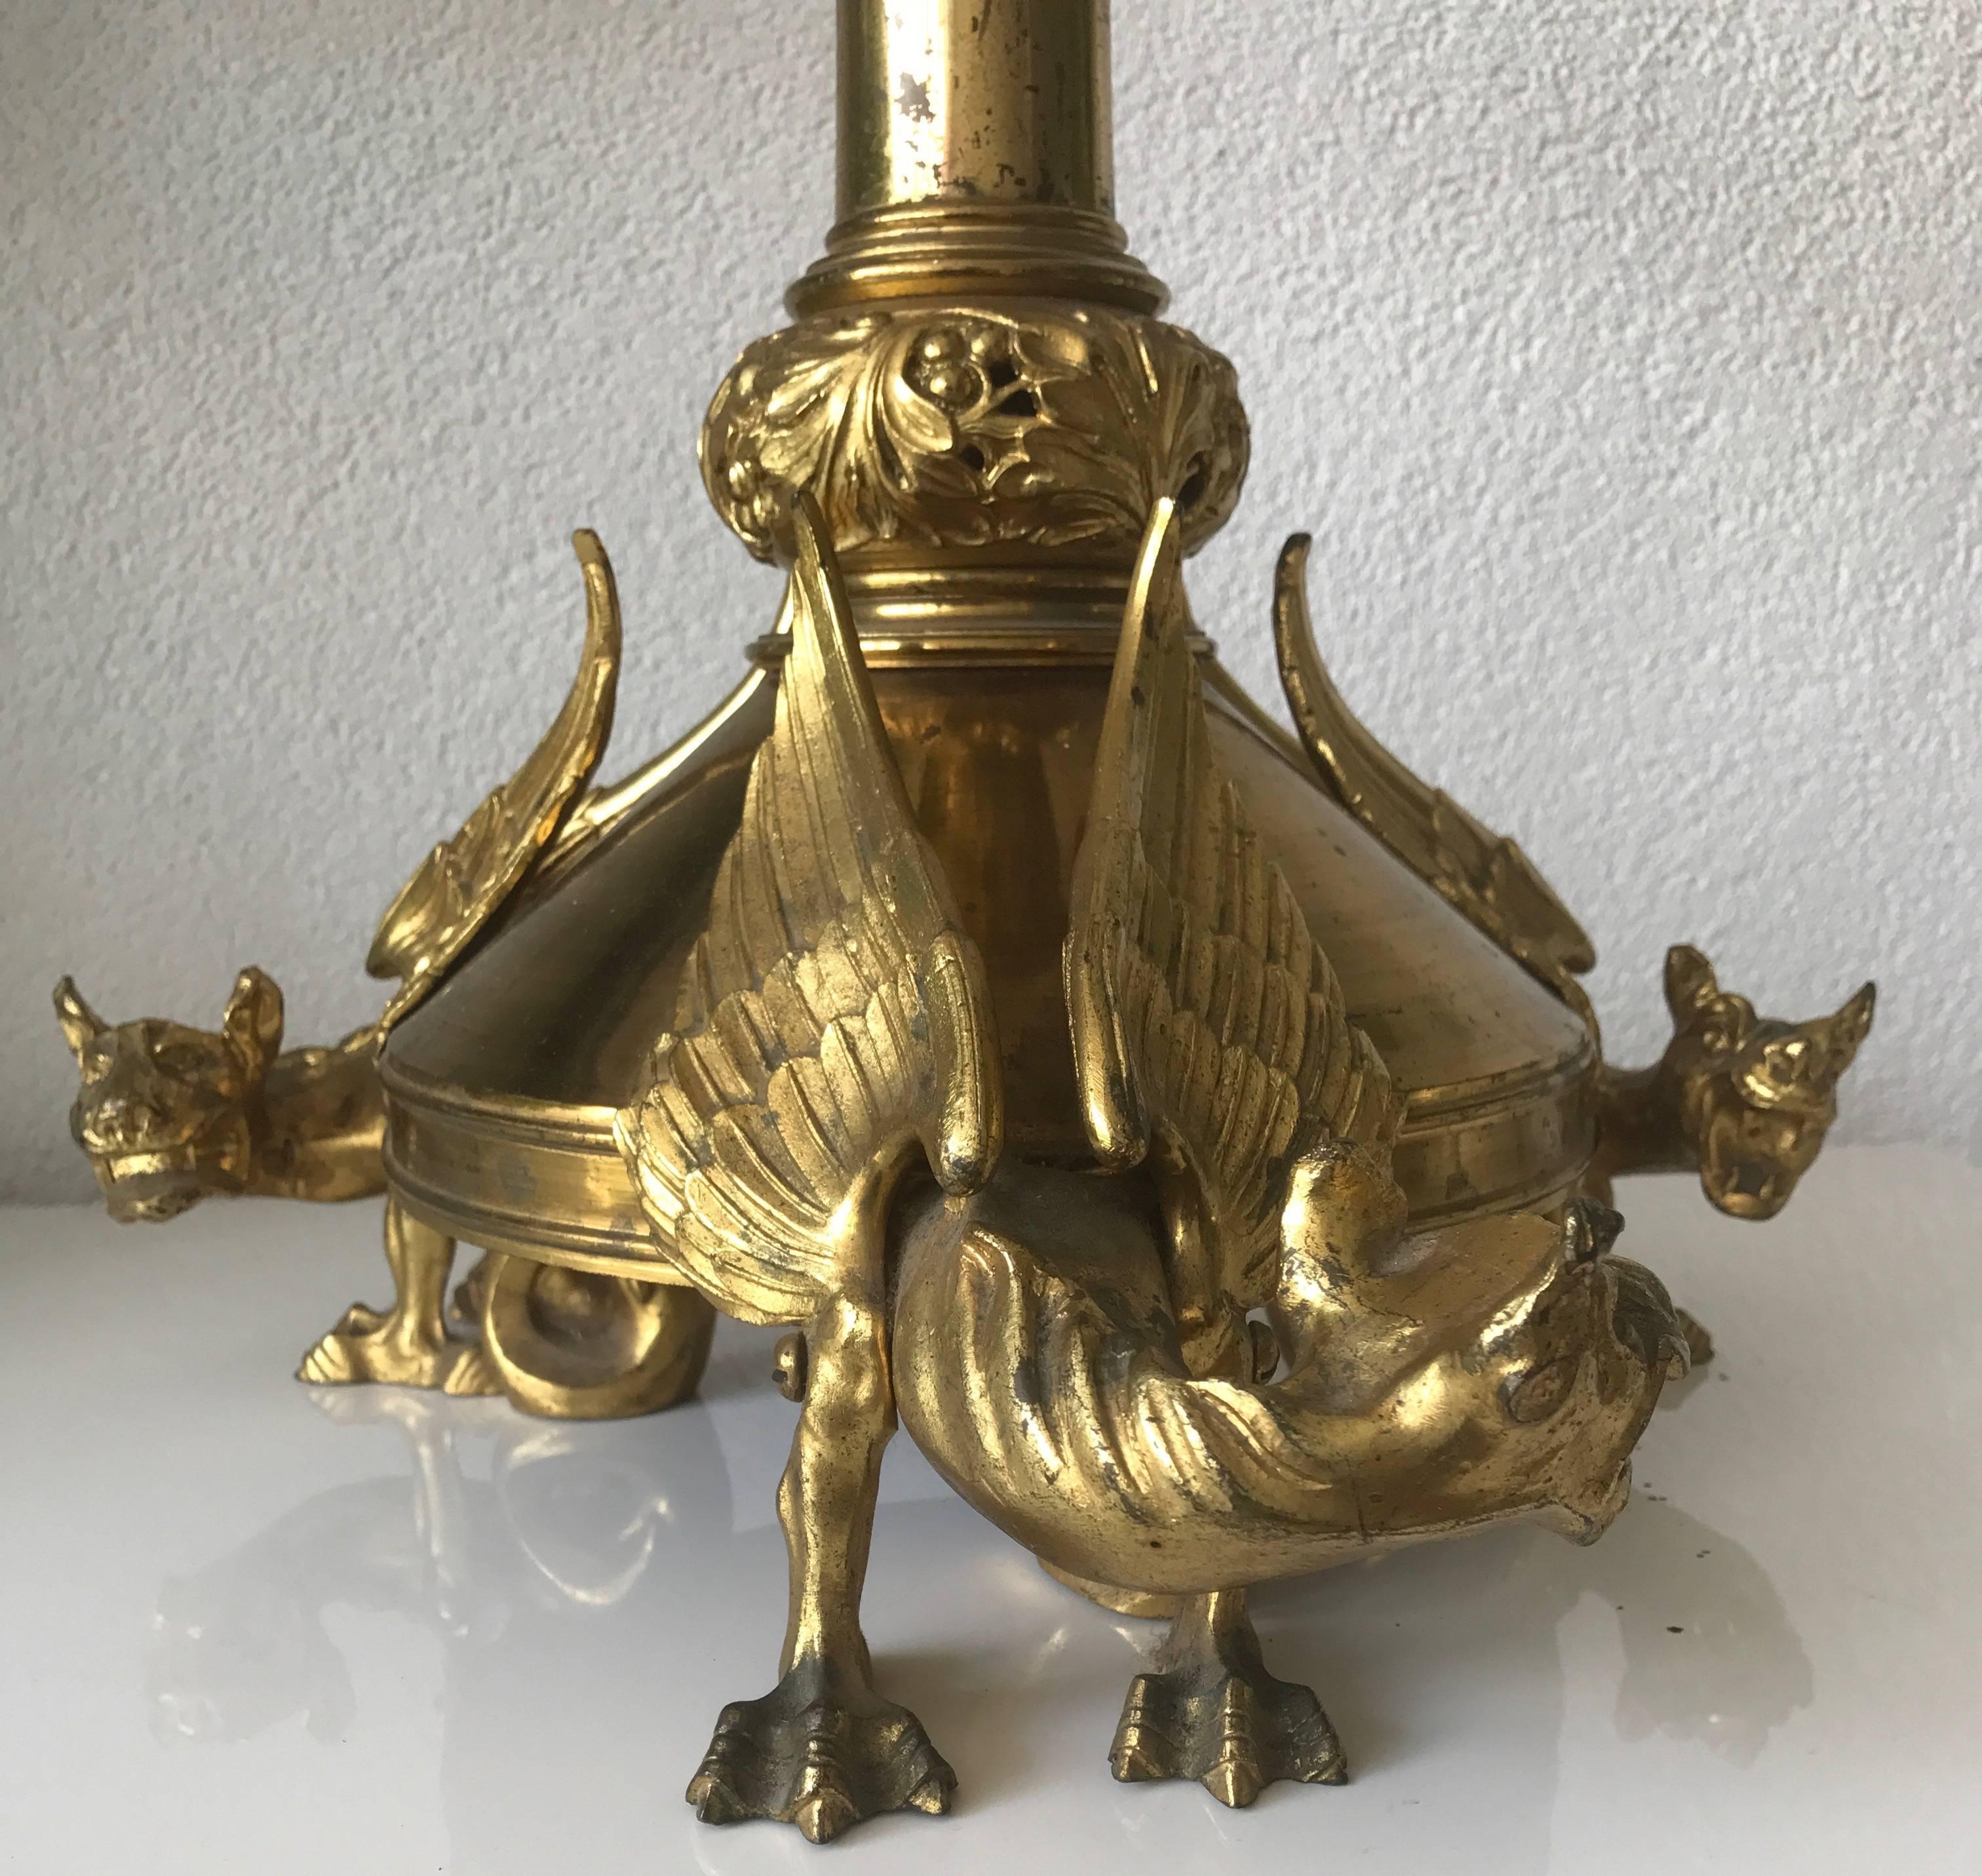 Impressive Gothic Revival Sizable Antique French Gilt Bronze Chimera Candlestick In Excellent Condition For Sale In Lisse, NL